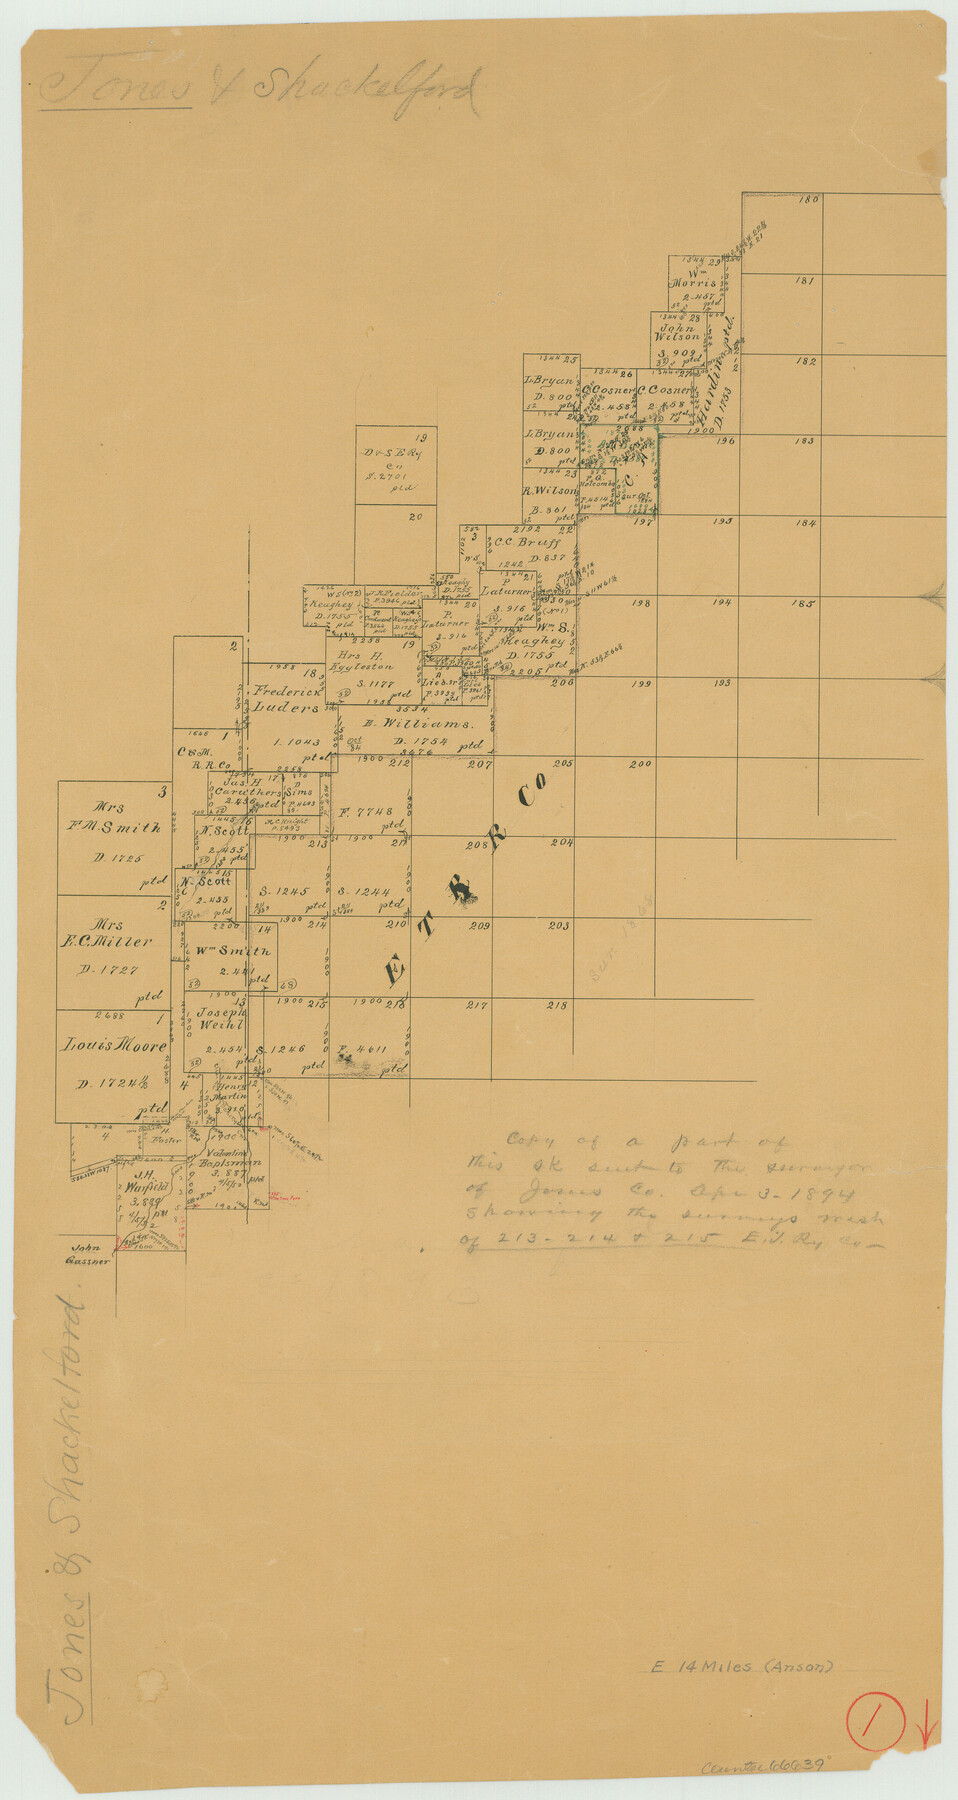 66639, Jones County Working Sketch 1, General Map Collection